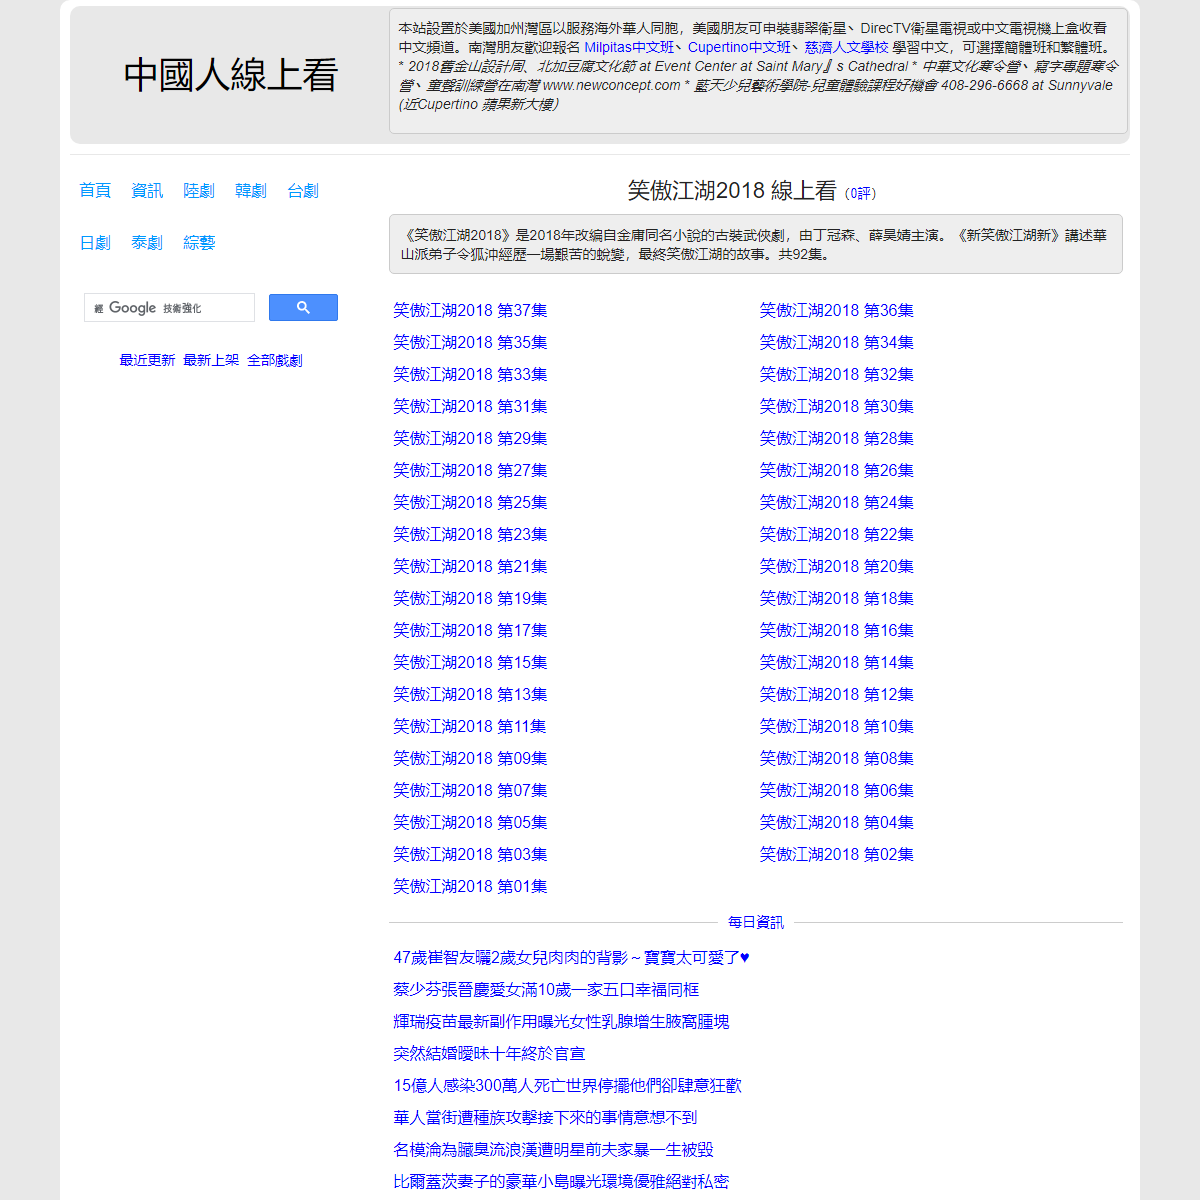 A complete backup of https://chinaq.tv/cn180226/